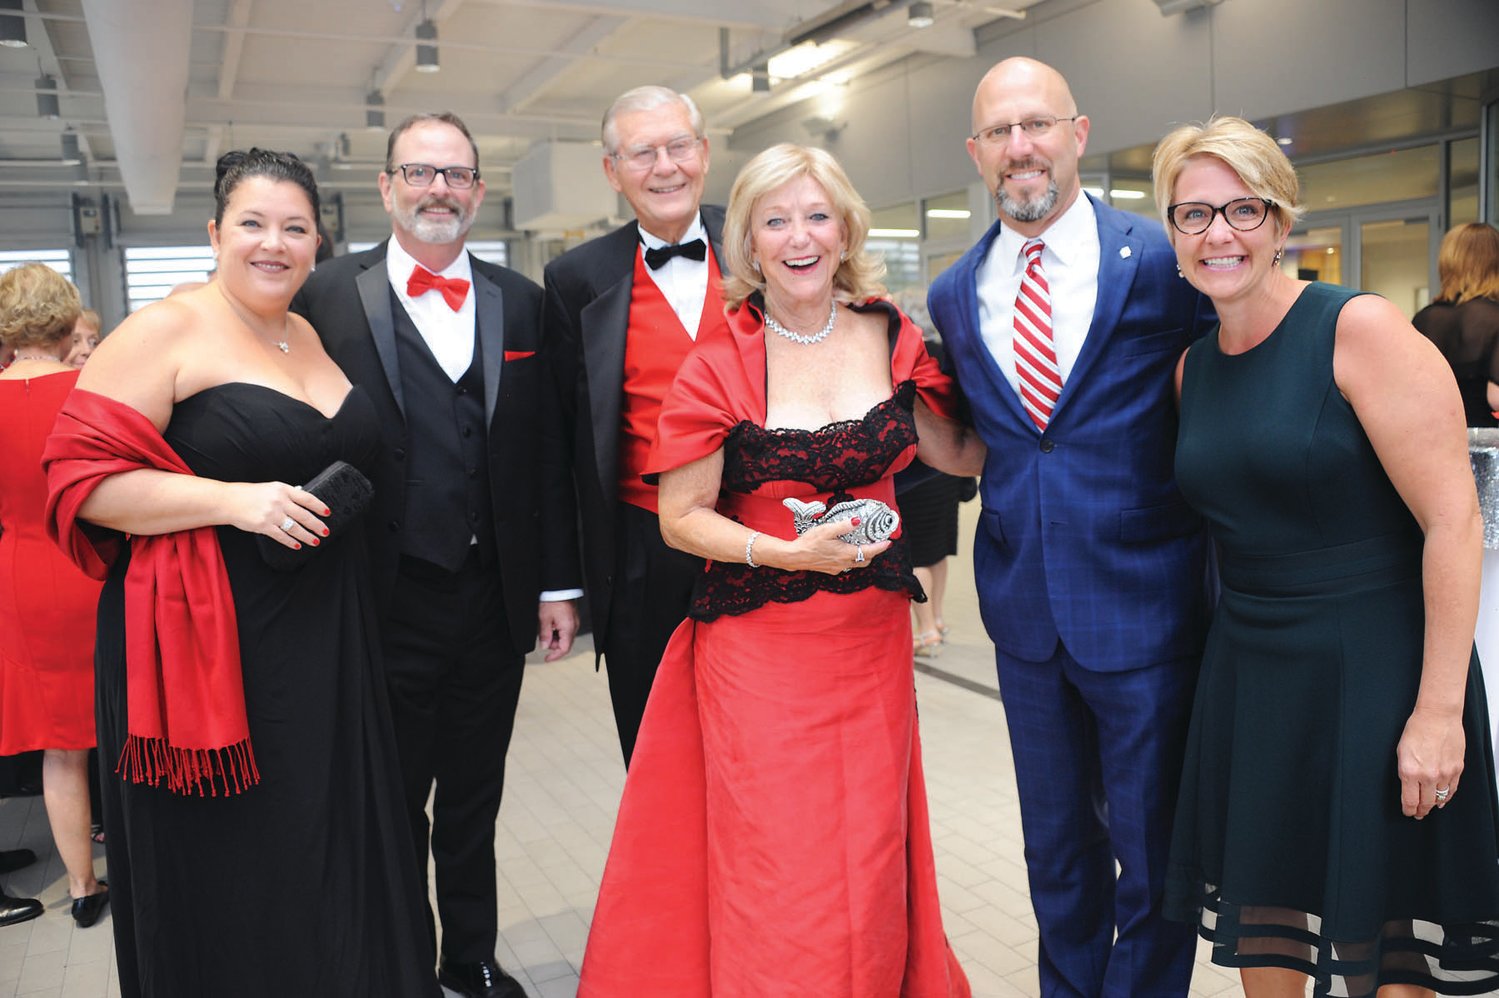 Jennifer and Stephen Eckfield, Ron Unterberger and Dr. Vail Garvin, and Zane and Amy Moore. Photograph by Debby High